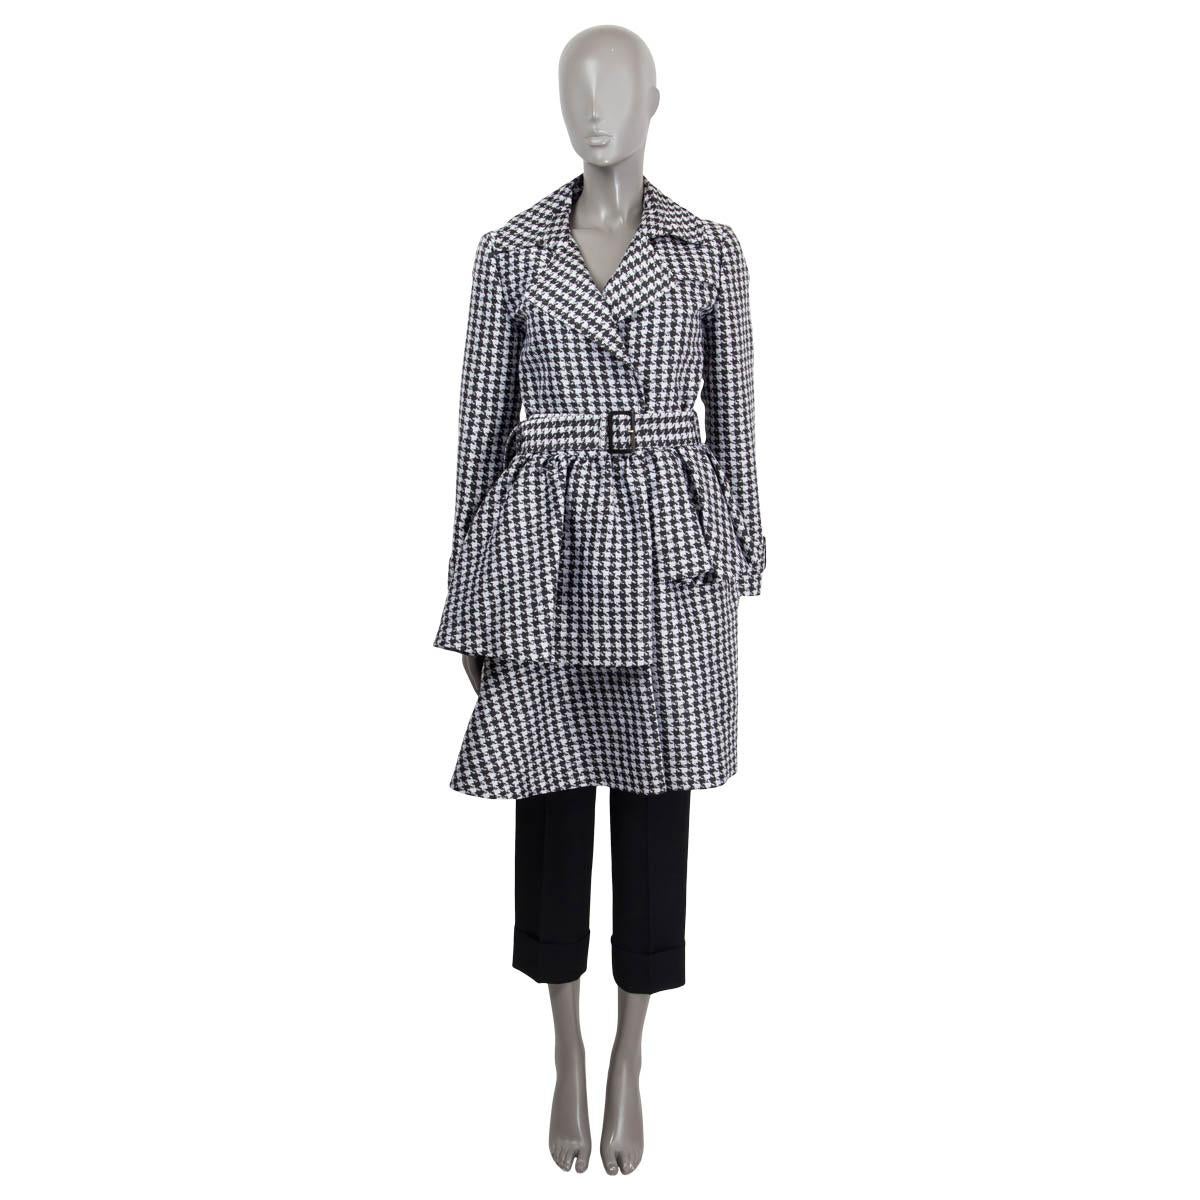 100% authentic Viktor & Rolf houndstooth asymmetrical trench coat in black and silver polyester (84%) and silk (16%). Features a detachable belt, epaulettes on the cuffs and two side slit pockets. Opens with push buttons on the front. Lined in black